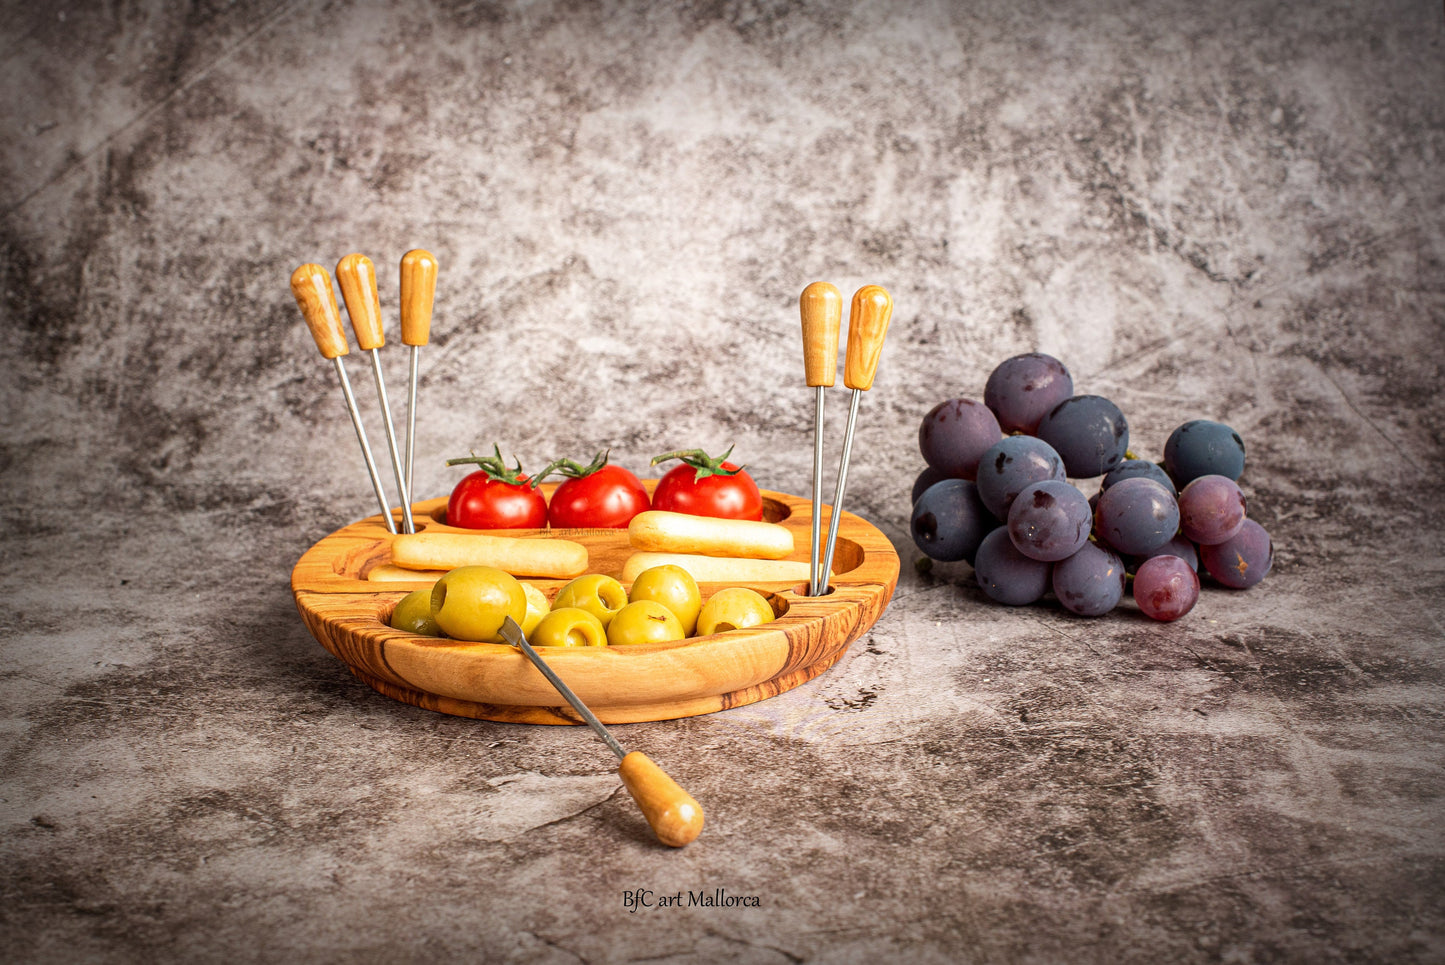 Plate Olive Wood Appetizers 3 departments, Plate With Skewers For Olives and Pipes, Sauce Plate, Seasoning Plate, Olive Wood Plate, Fruit